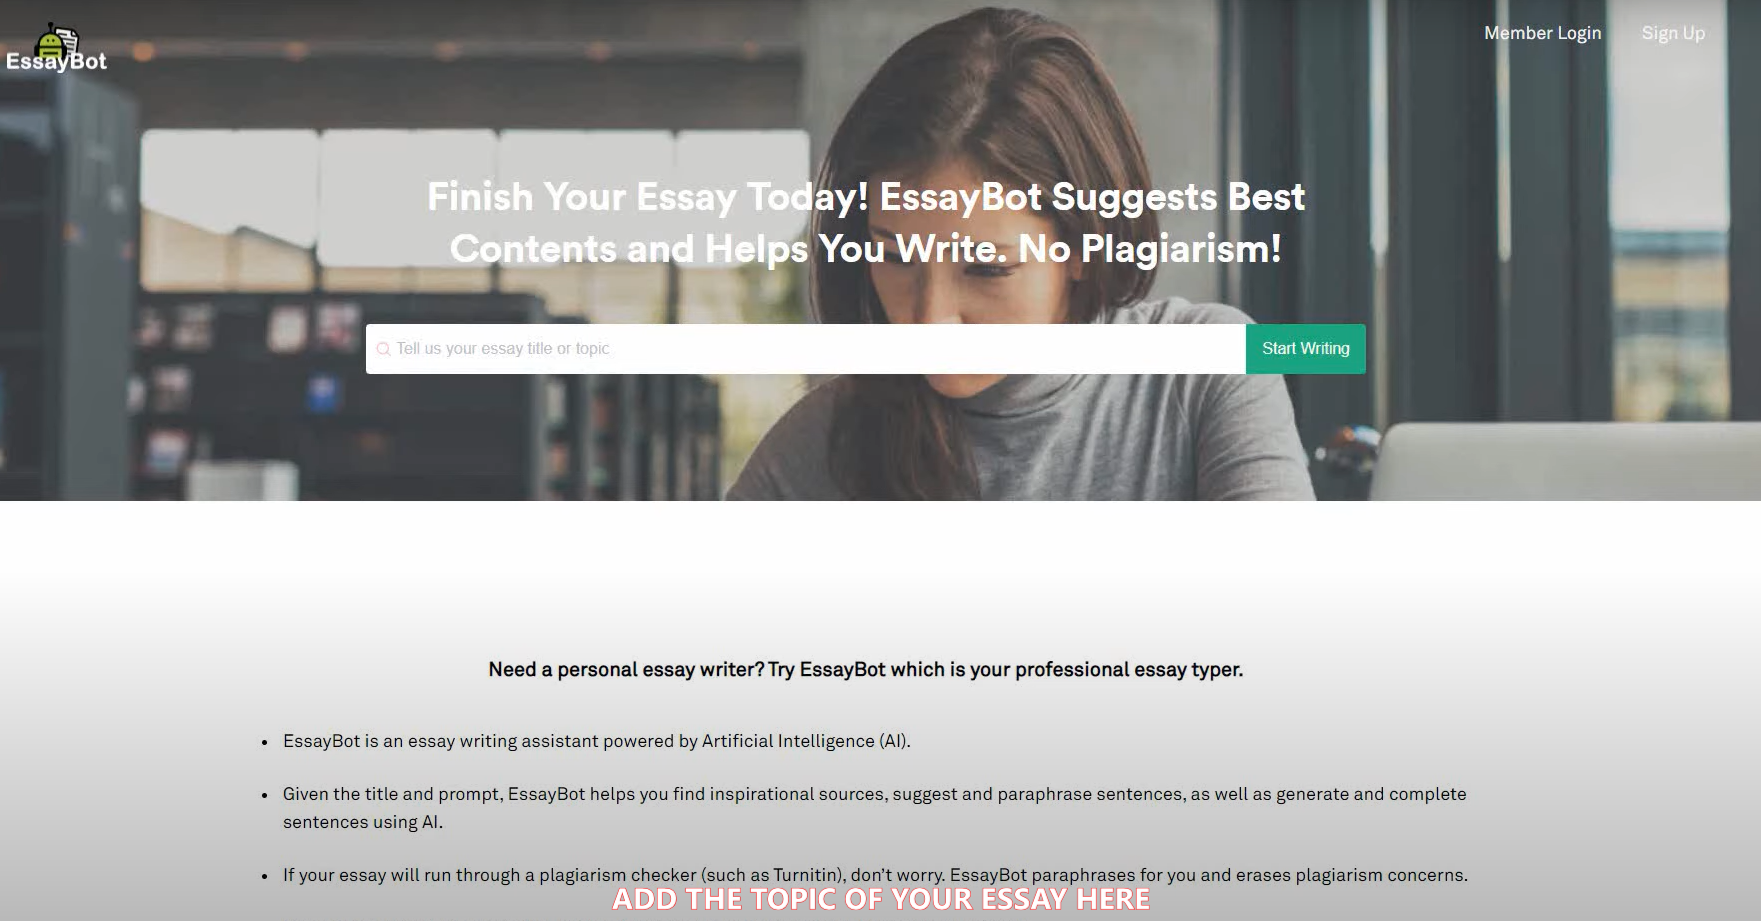 ESSAYBOT ALLOWS YOU TO WRITE PERSONAL ESSAYS FAST